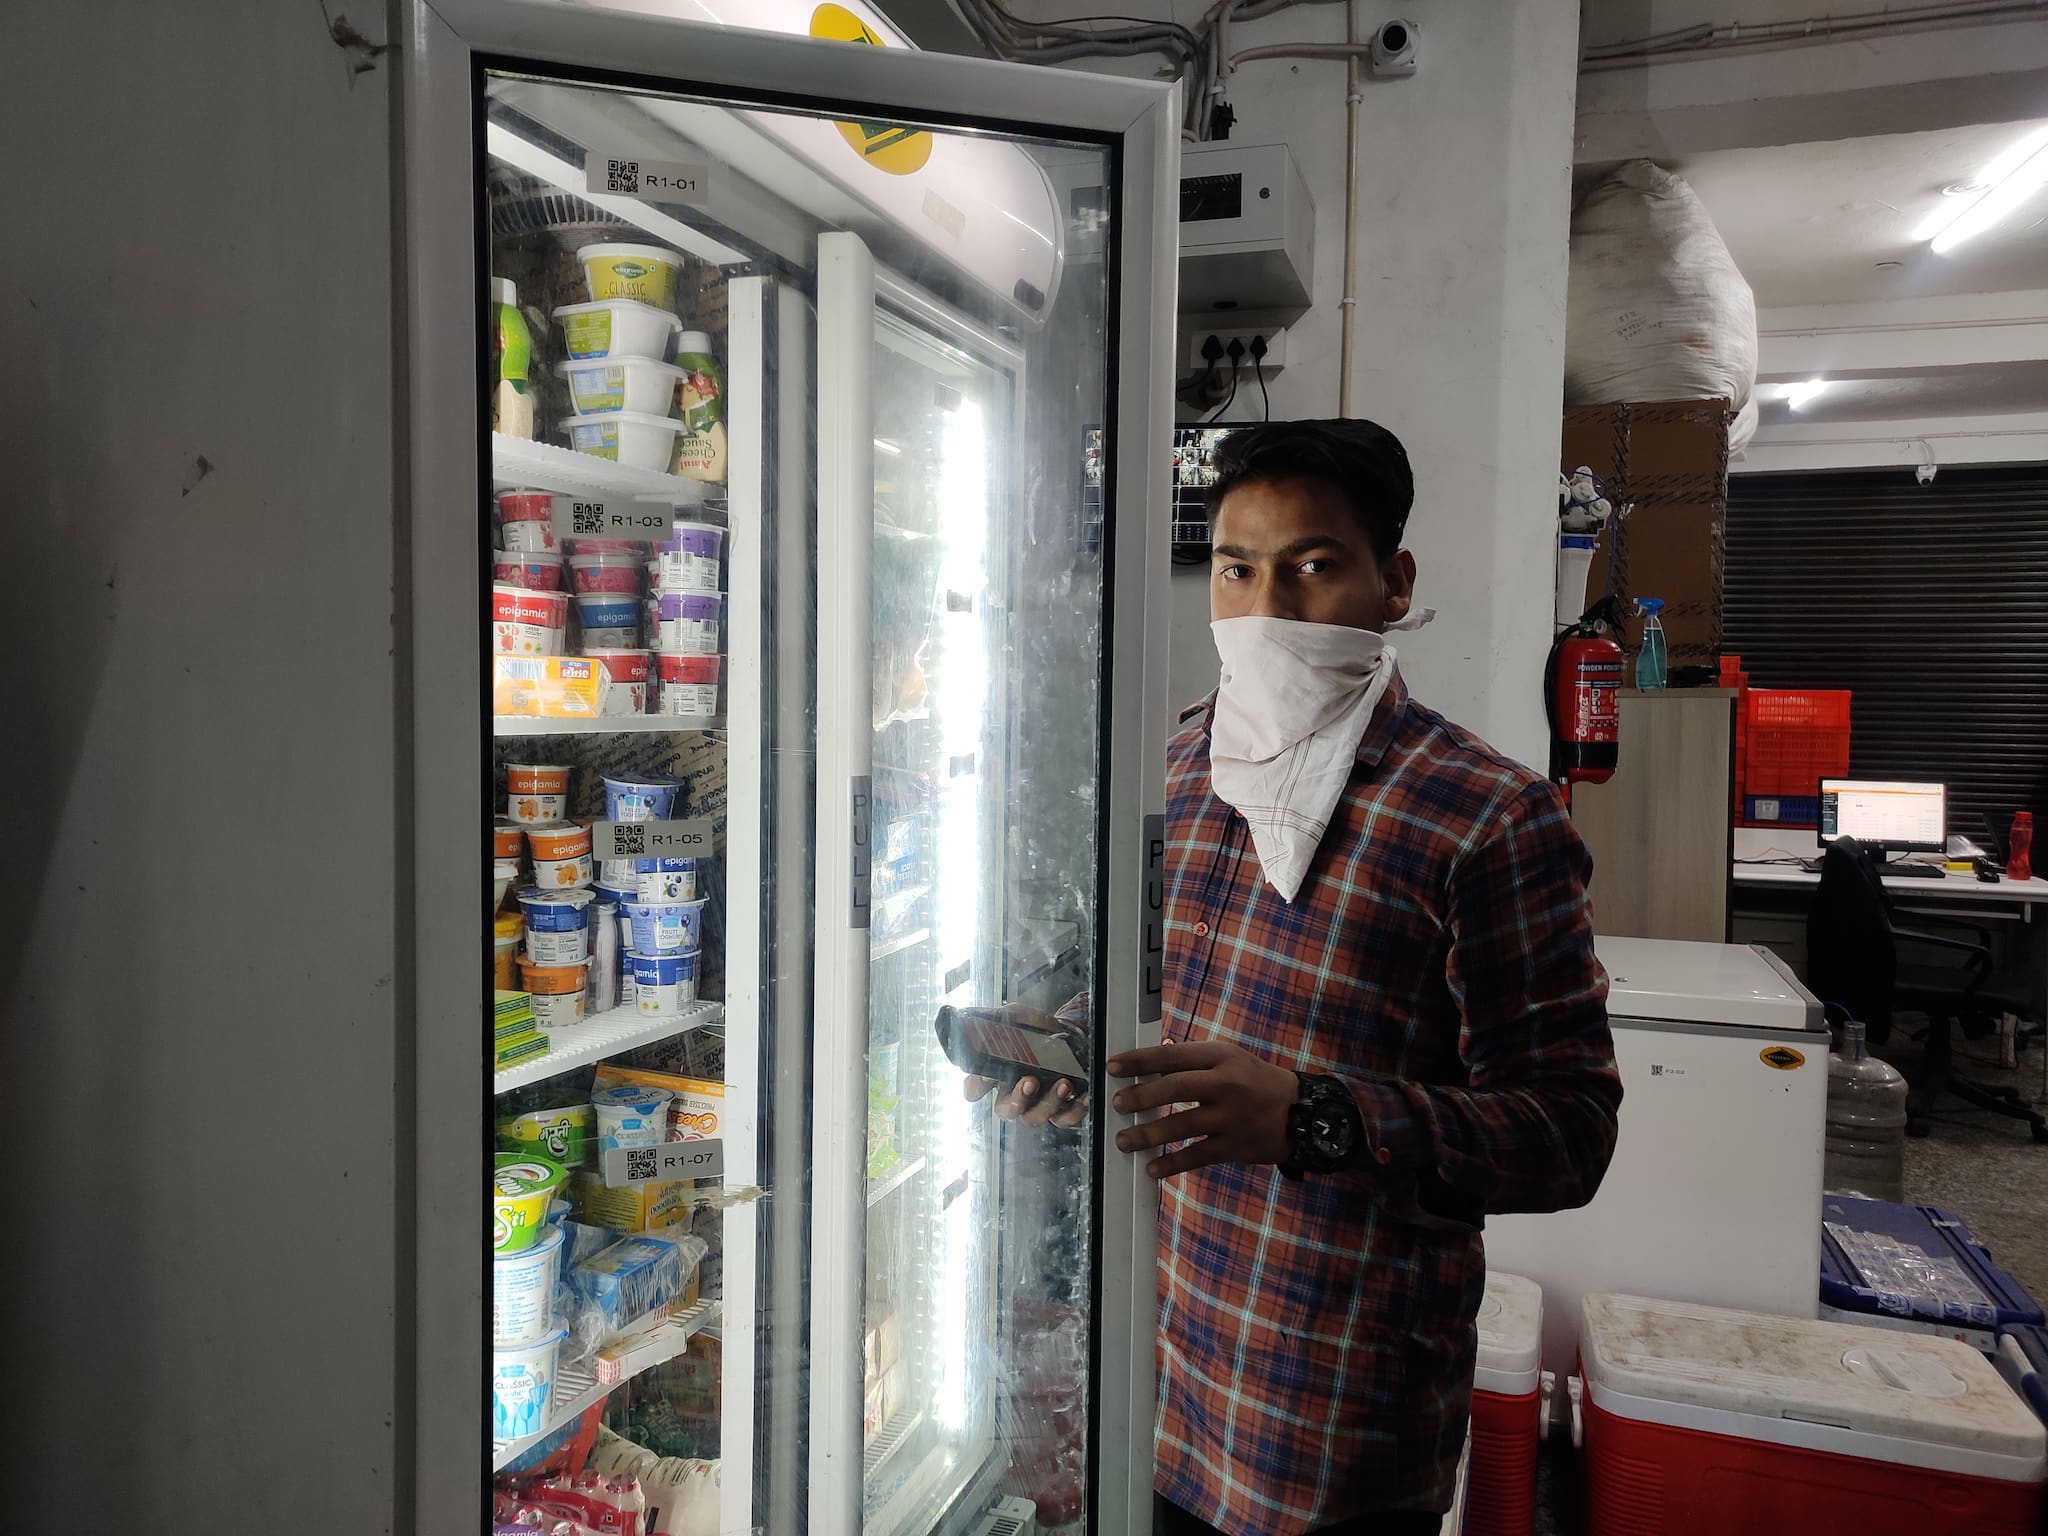 Vishu scanning items from the cold storage section.